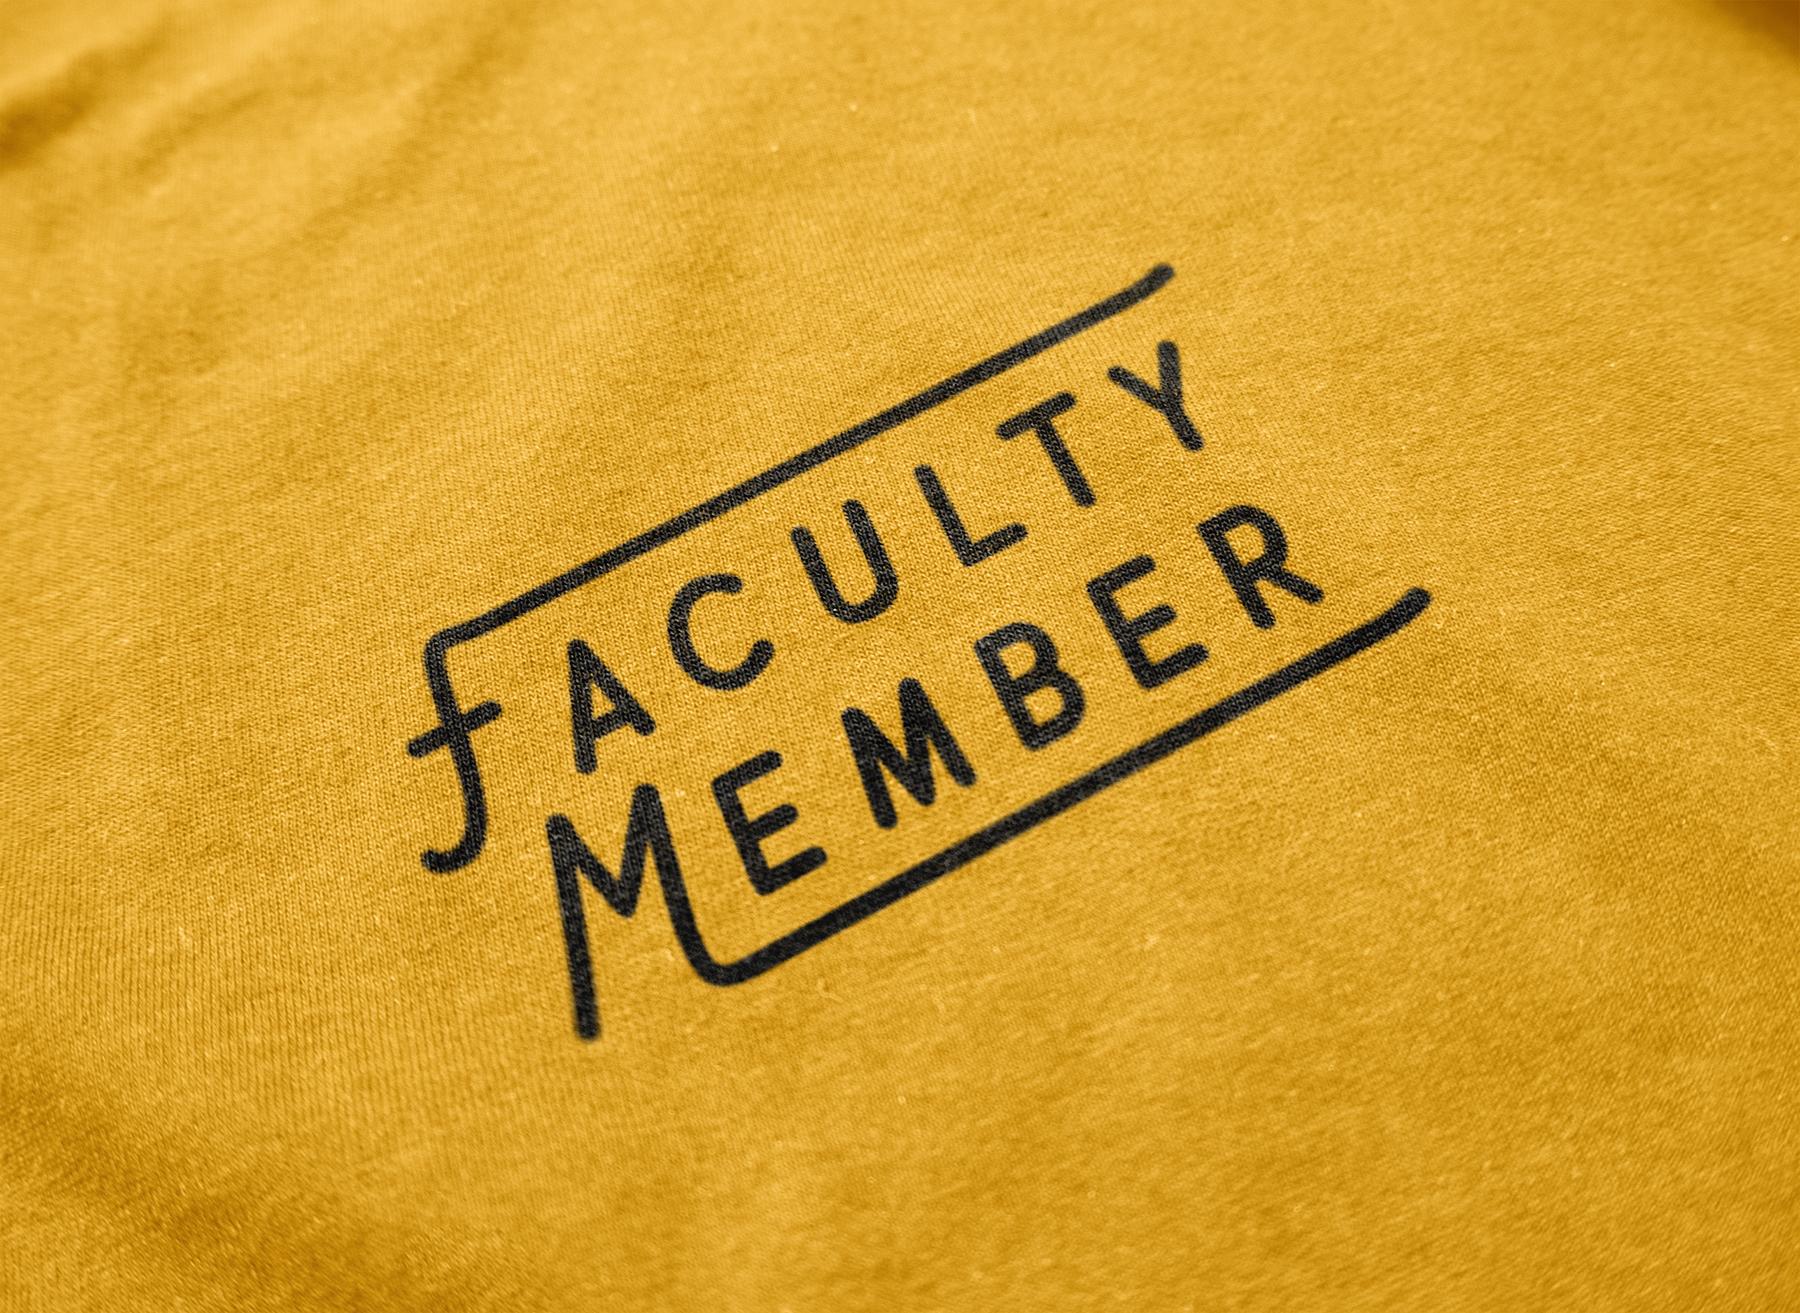 "Faculty members" screen printed in black on a yellow shirt.